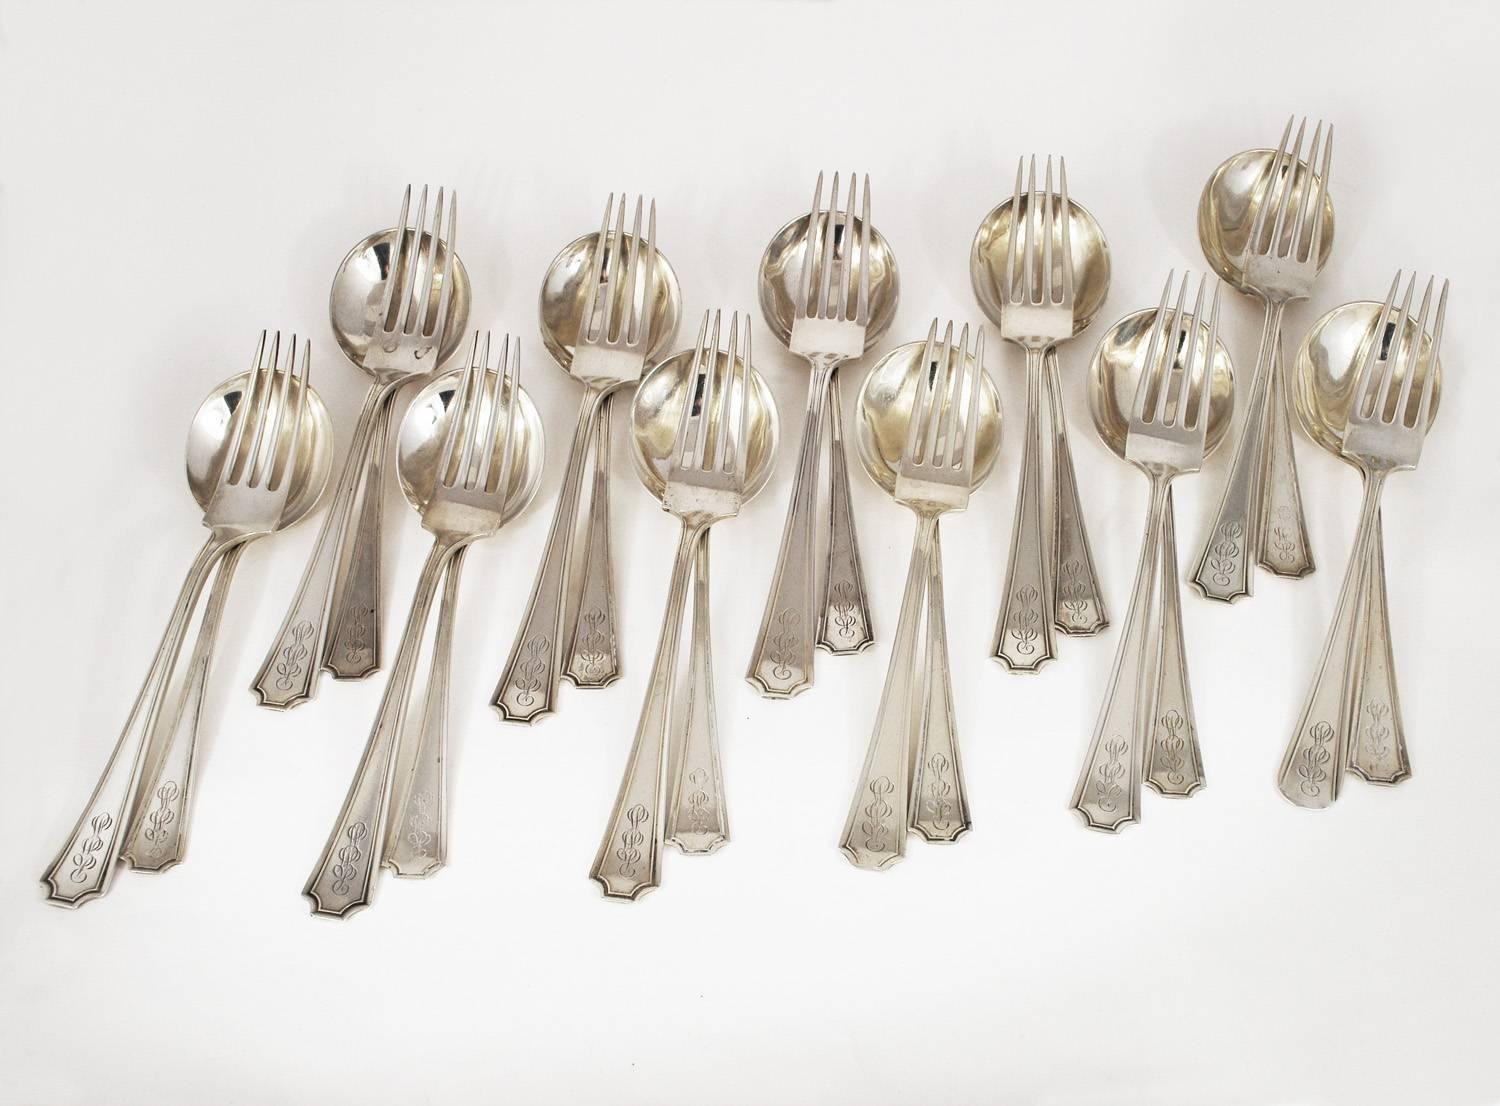 A vintage set of Gorham sterling flatware in the Fairfax pattern. Fairfax boasts clean lines that will work well with a wide variety of China. 

This set for ten is comprised of:

Ten dinner forks, ten dinner knives, ten butter knives, ten cream